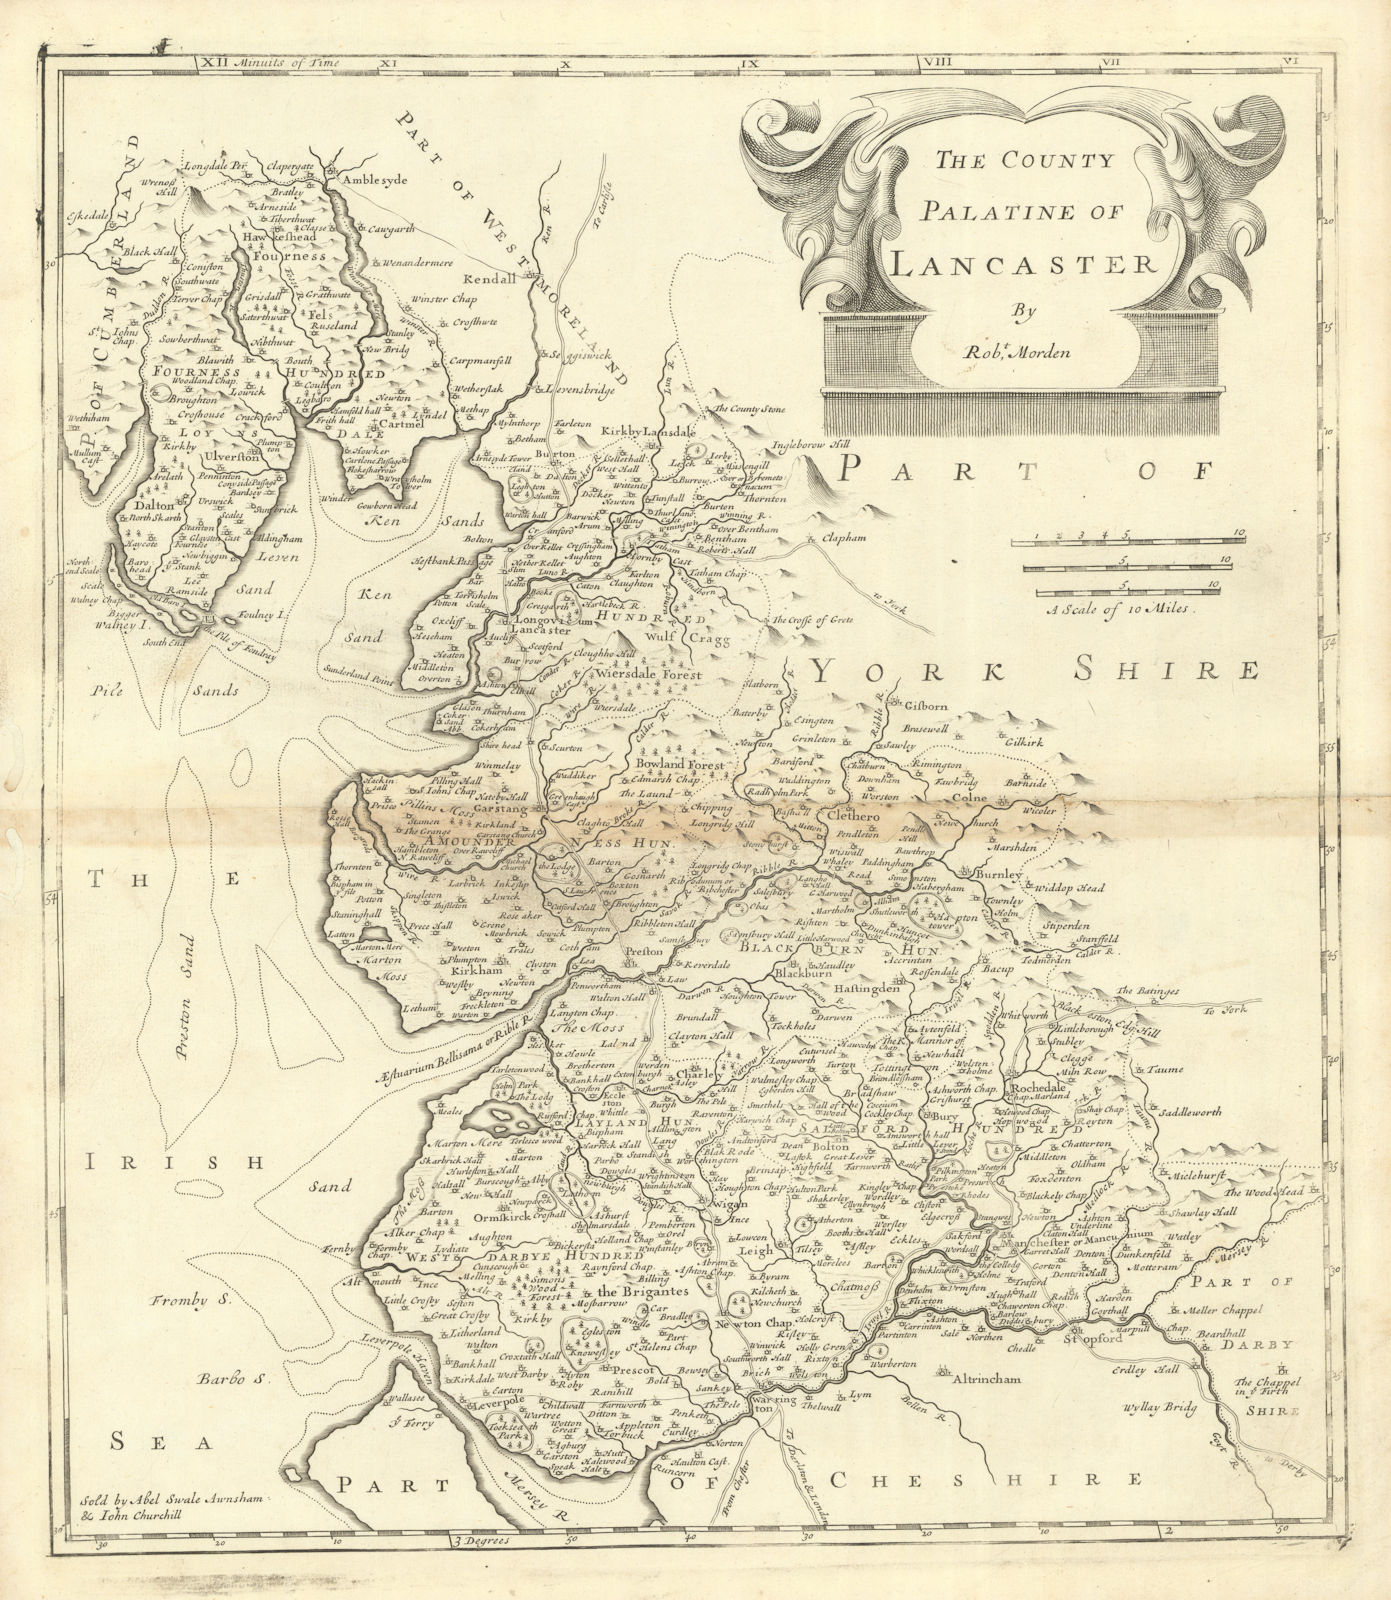 Associate Product Lancashire. 'THE COUNTY PALATINE OF LANCASTER' by ROBERT MORDEN 1695 old map